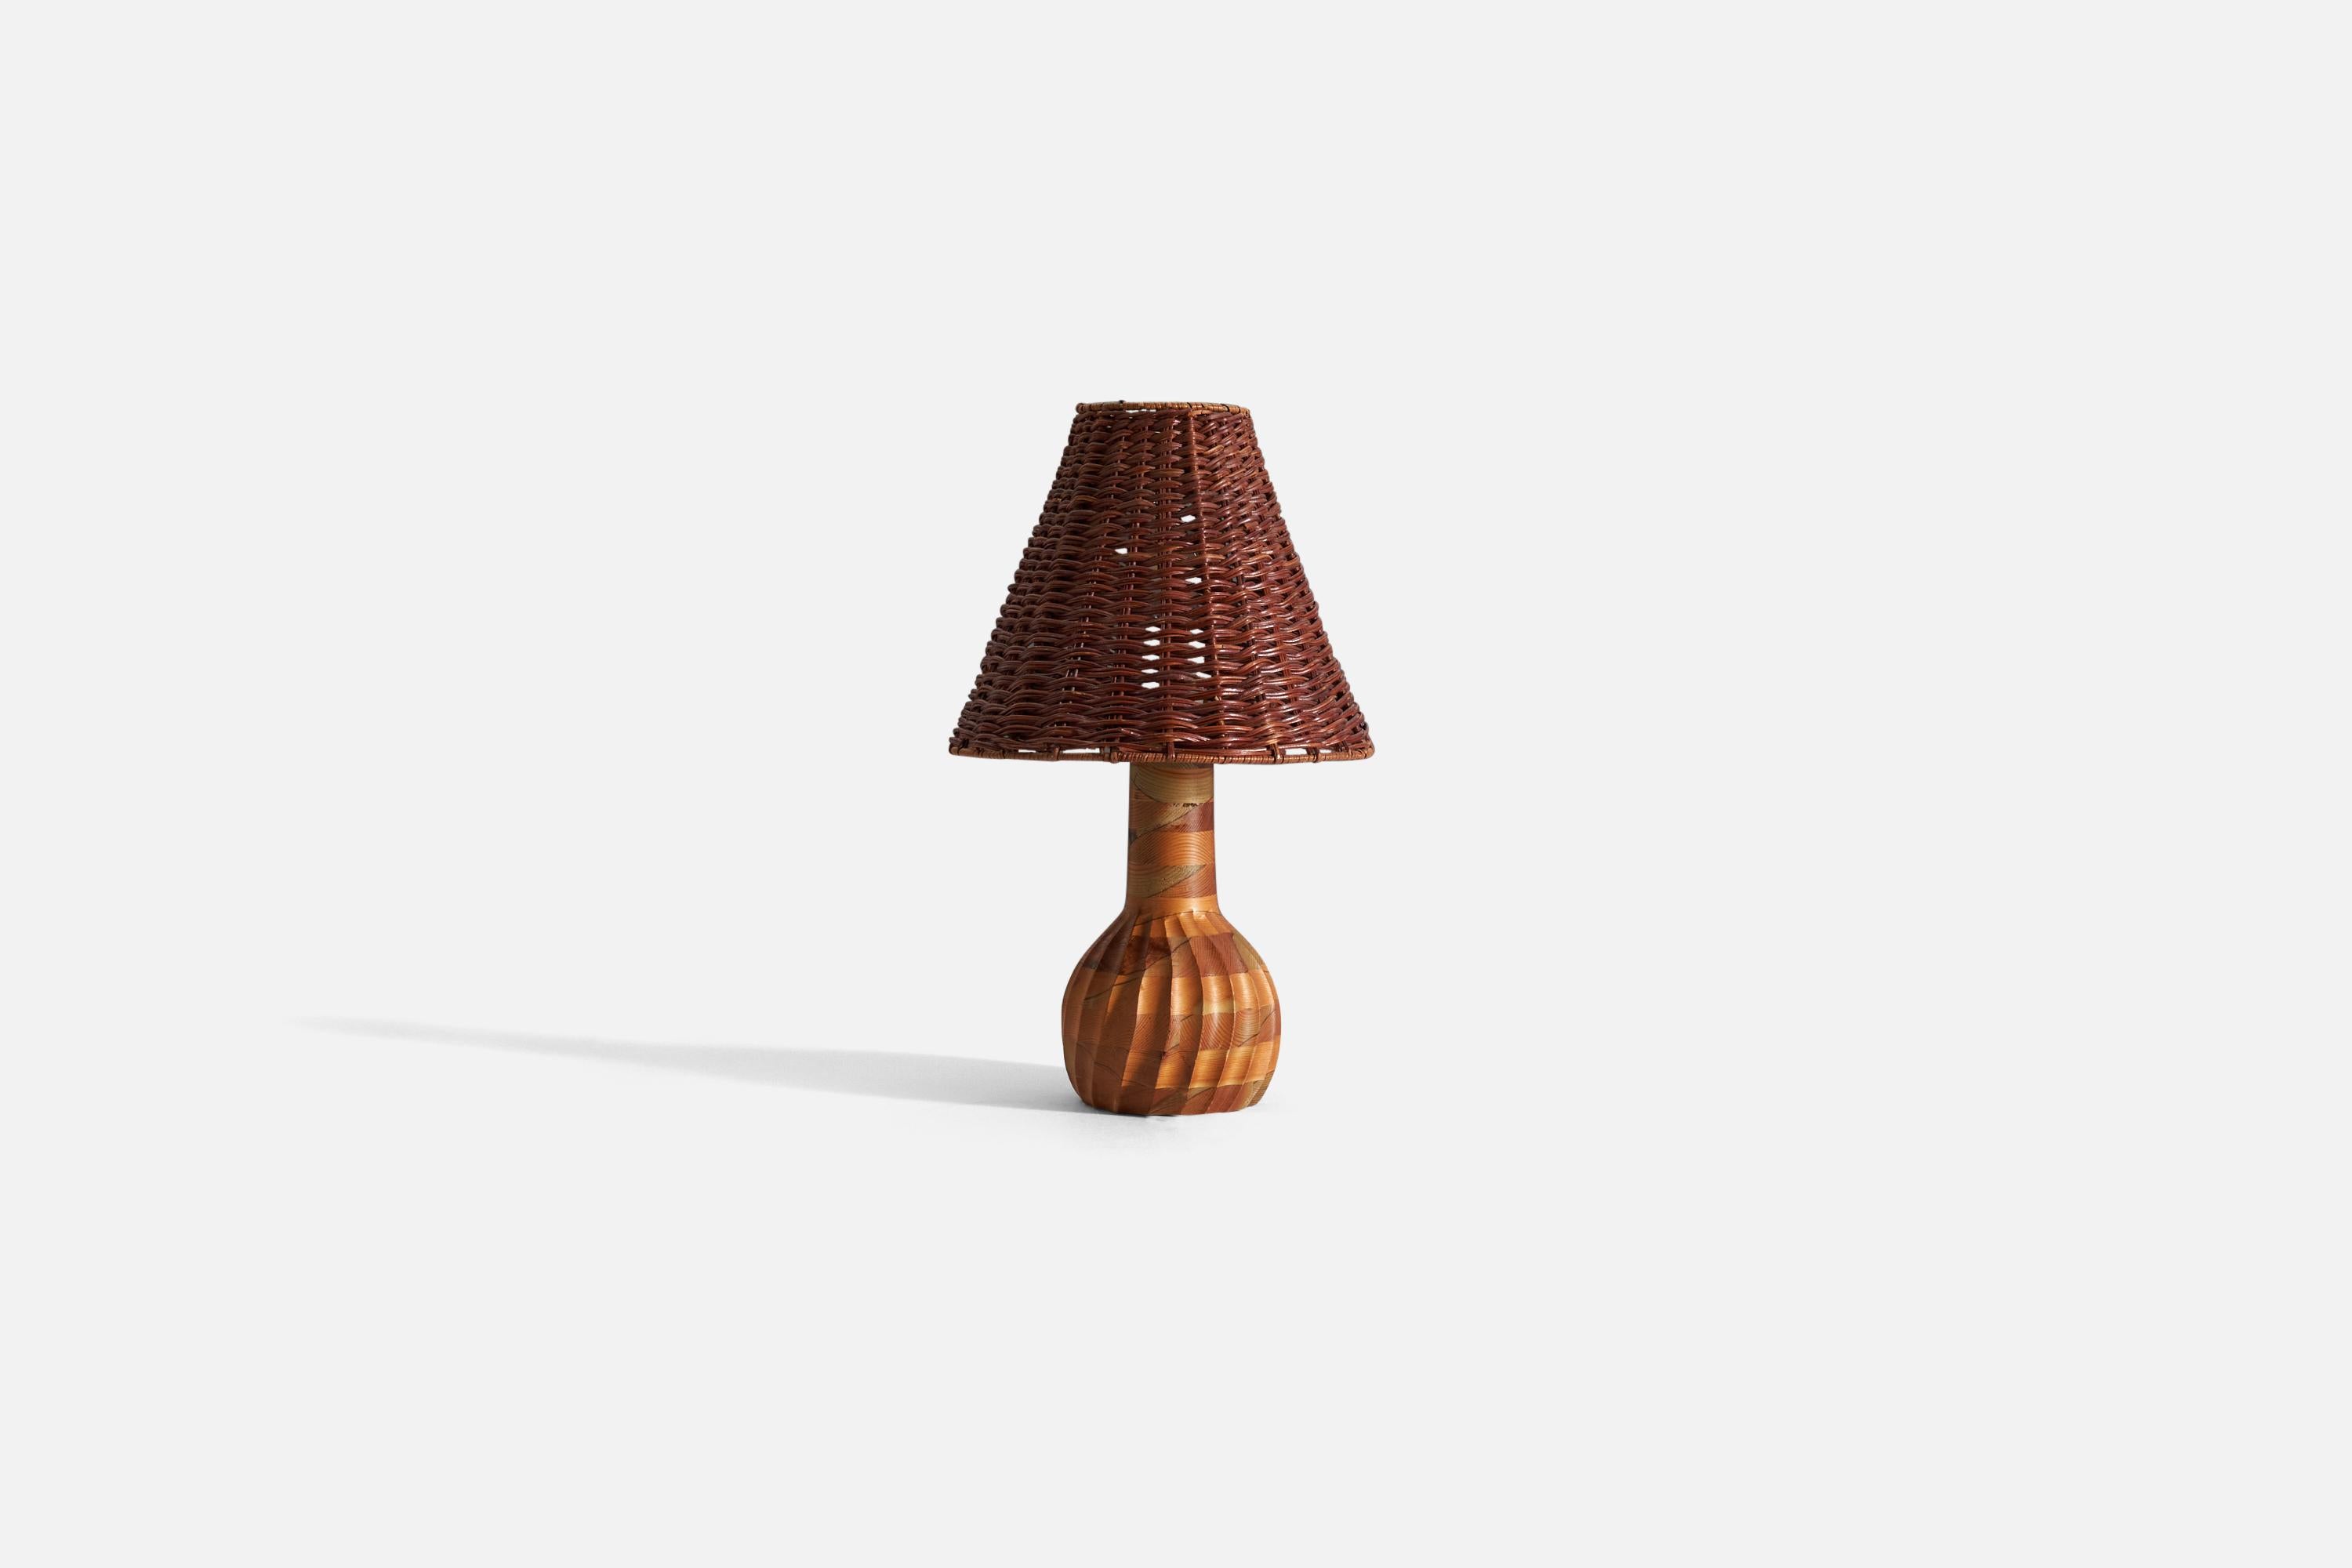 A table lamp, designed and produced in Sweden, c. 1970s. In stack-laminated pine. 

Stated dimensions exclude lampshade. Illustrated lampshade can be included upon request.

Dimensions of lamp with shade H 16.9” / W 10”.
Dimensions of shade-